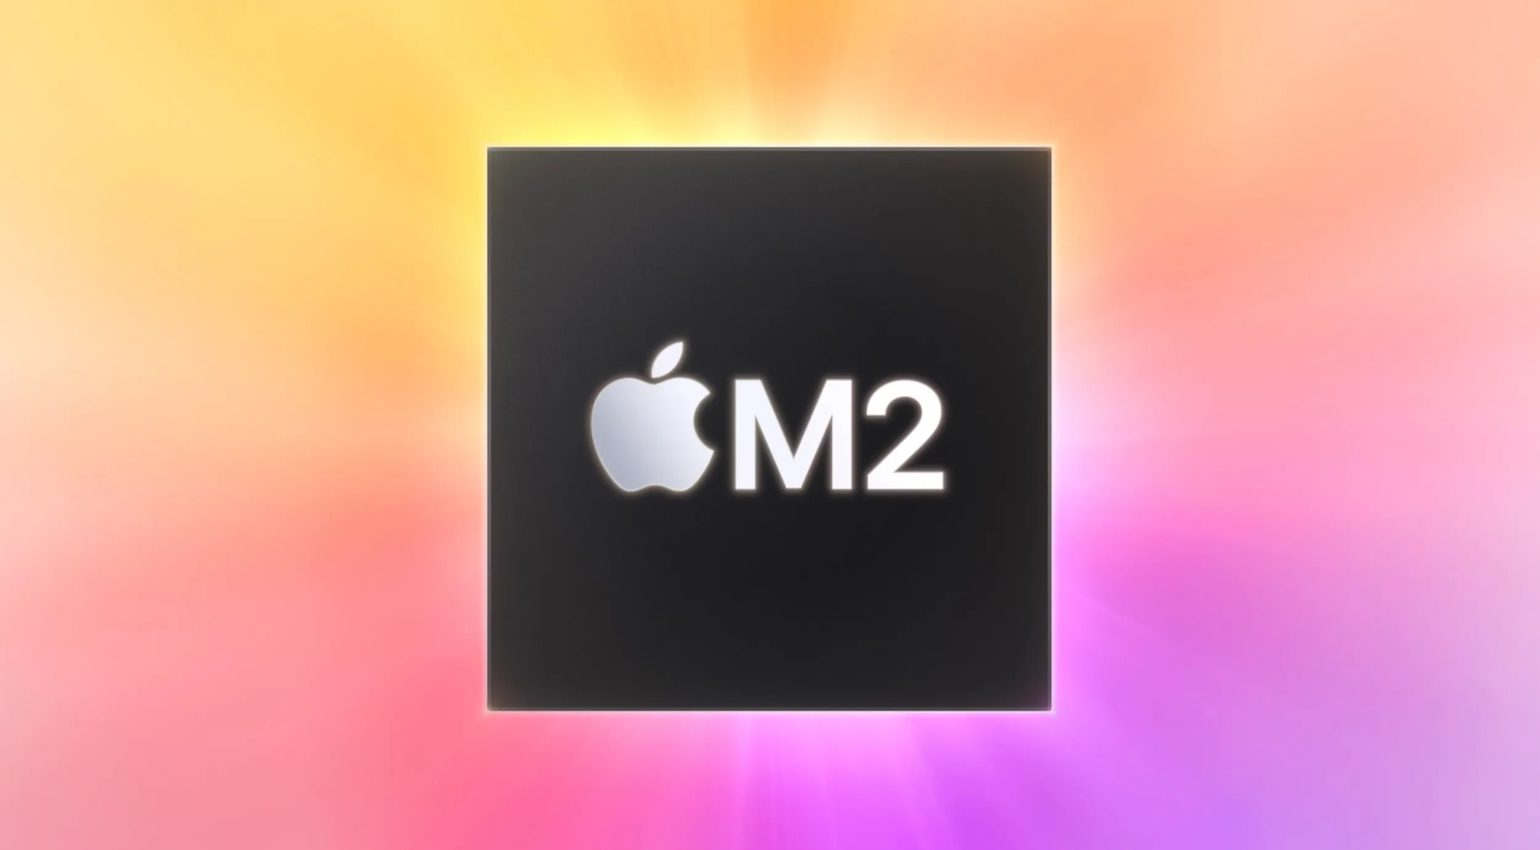 WWDC 2022: Macbook Air with M2, Macbook Pro 13" and more!